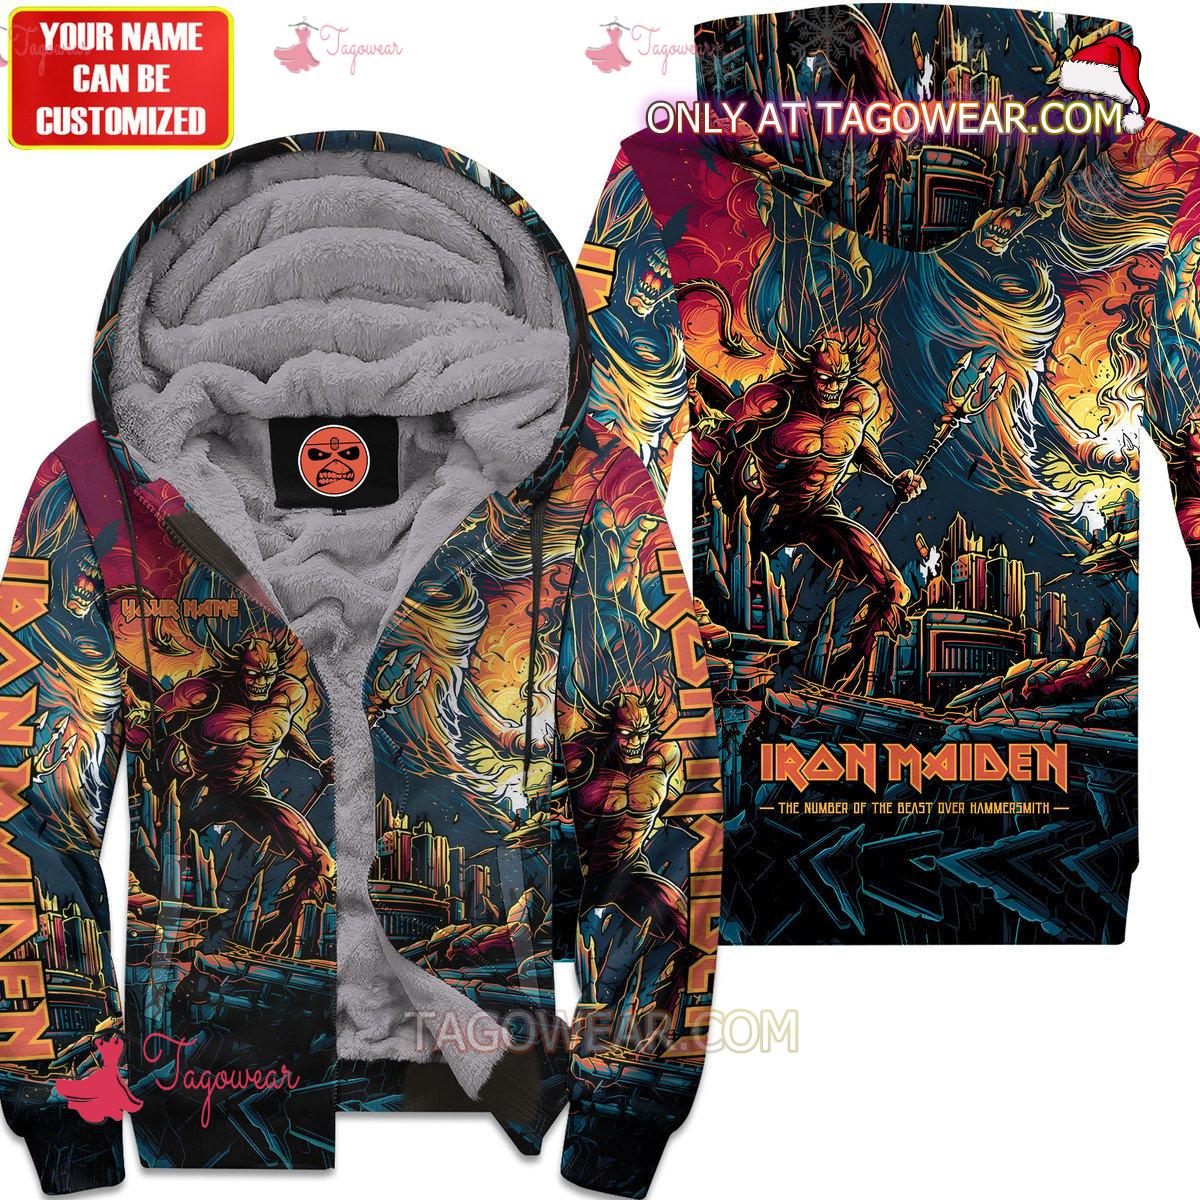 Iron Maiden The Number Of The Beast Over Hammersmith Personalized Fleece Hoodie a